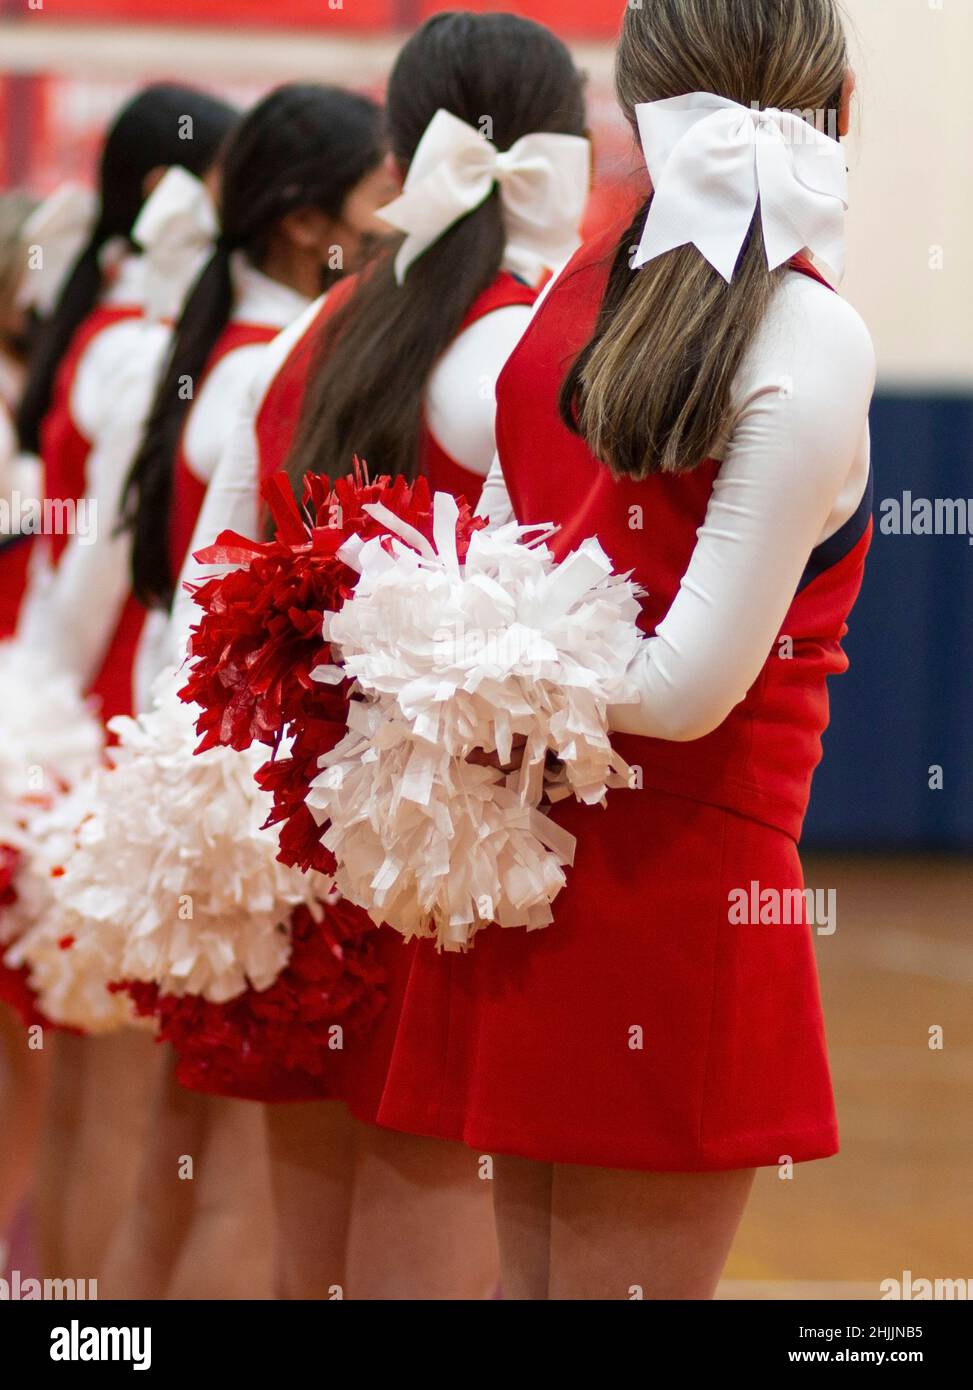 Cheerleaders standing with their pom poms behind them at a high school basketball game Stock Photo